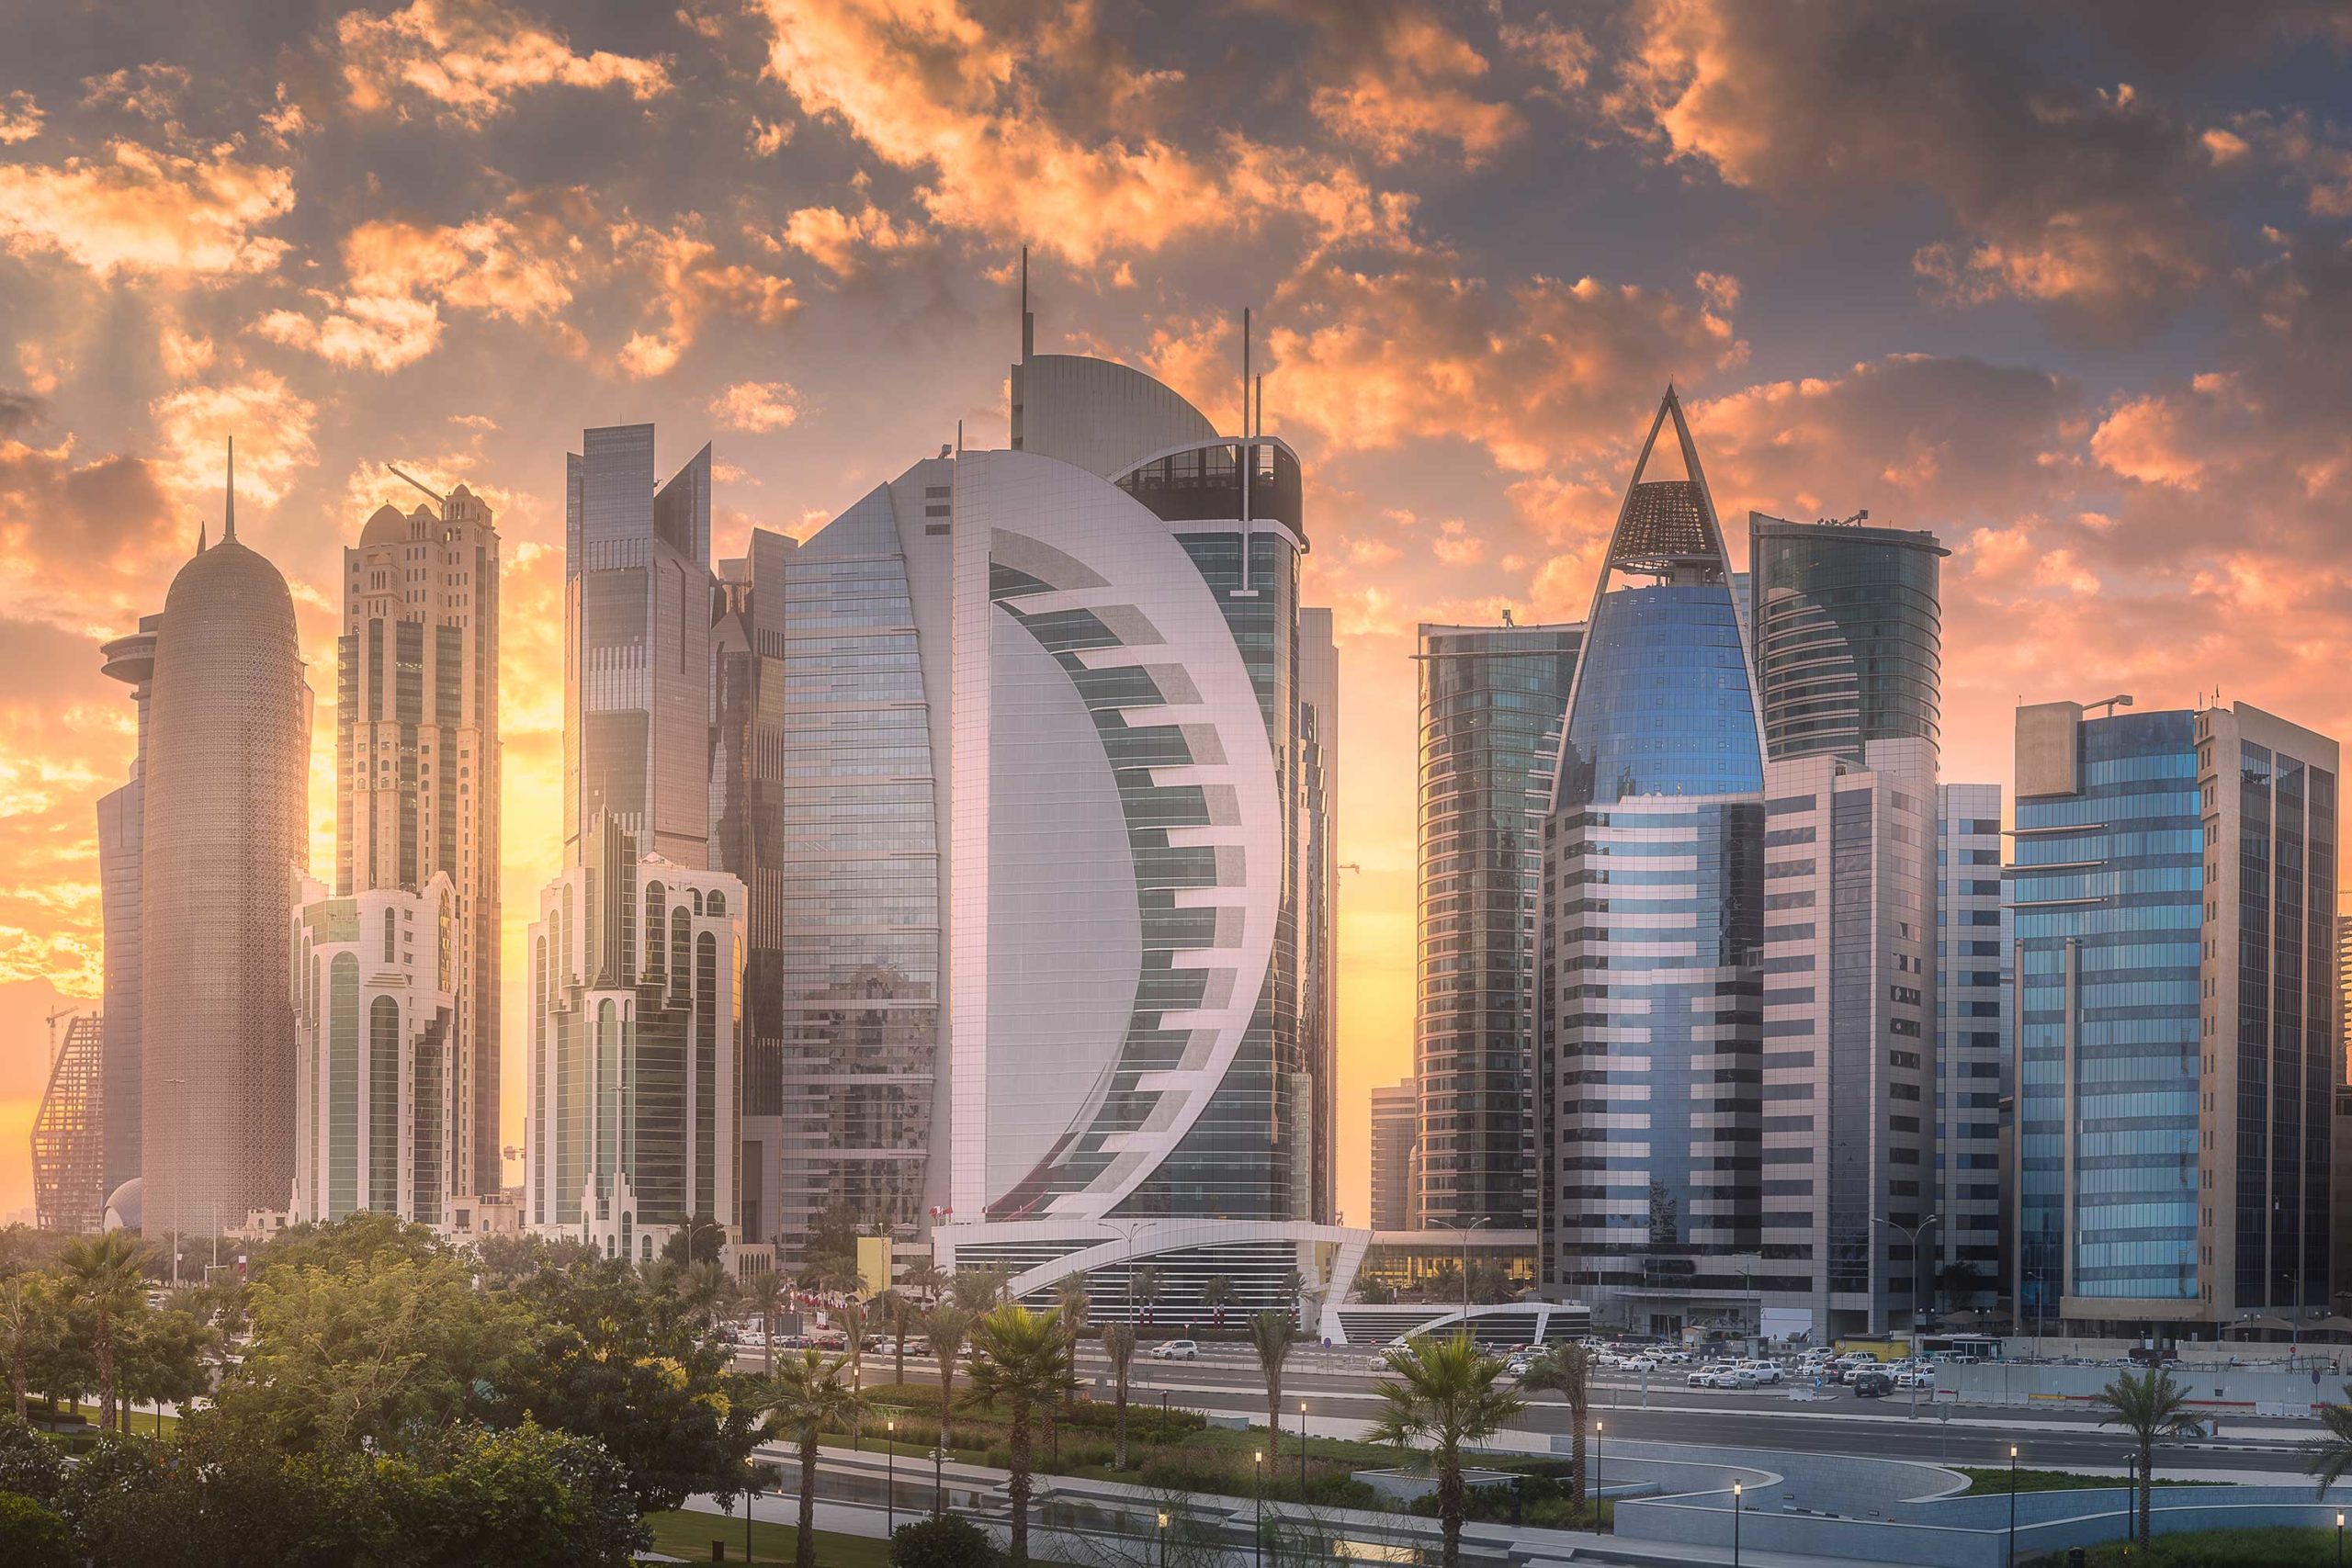 Qatar Petroleum leads a new wave of NOC investment in international exploration